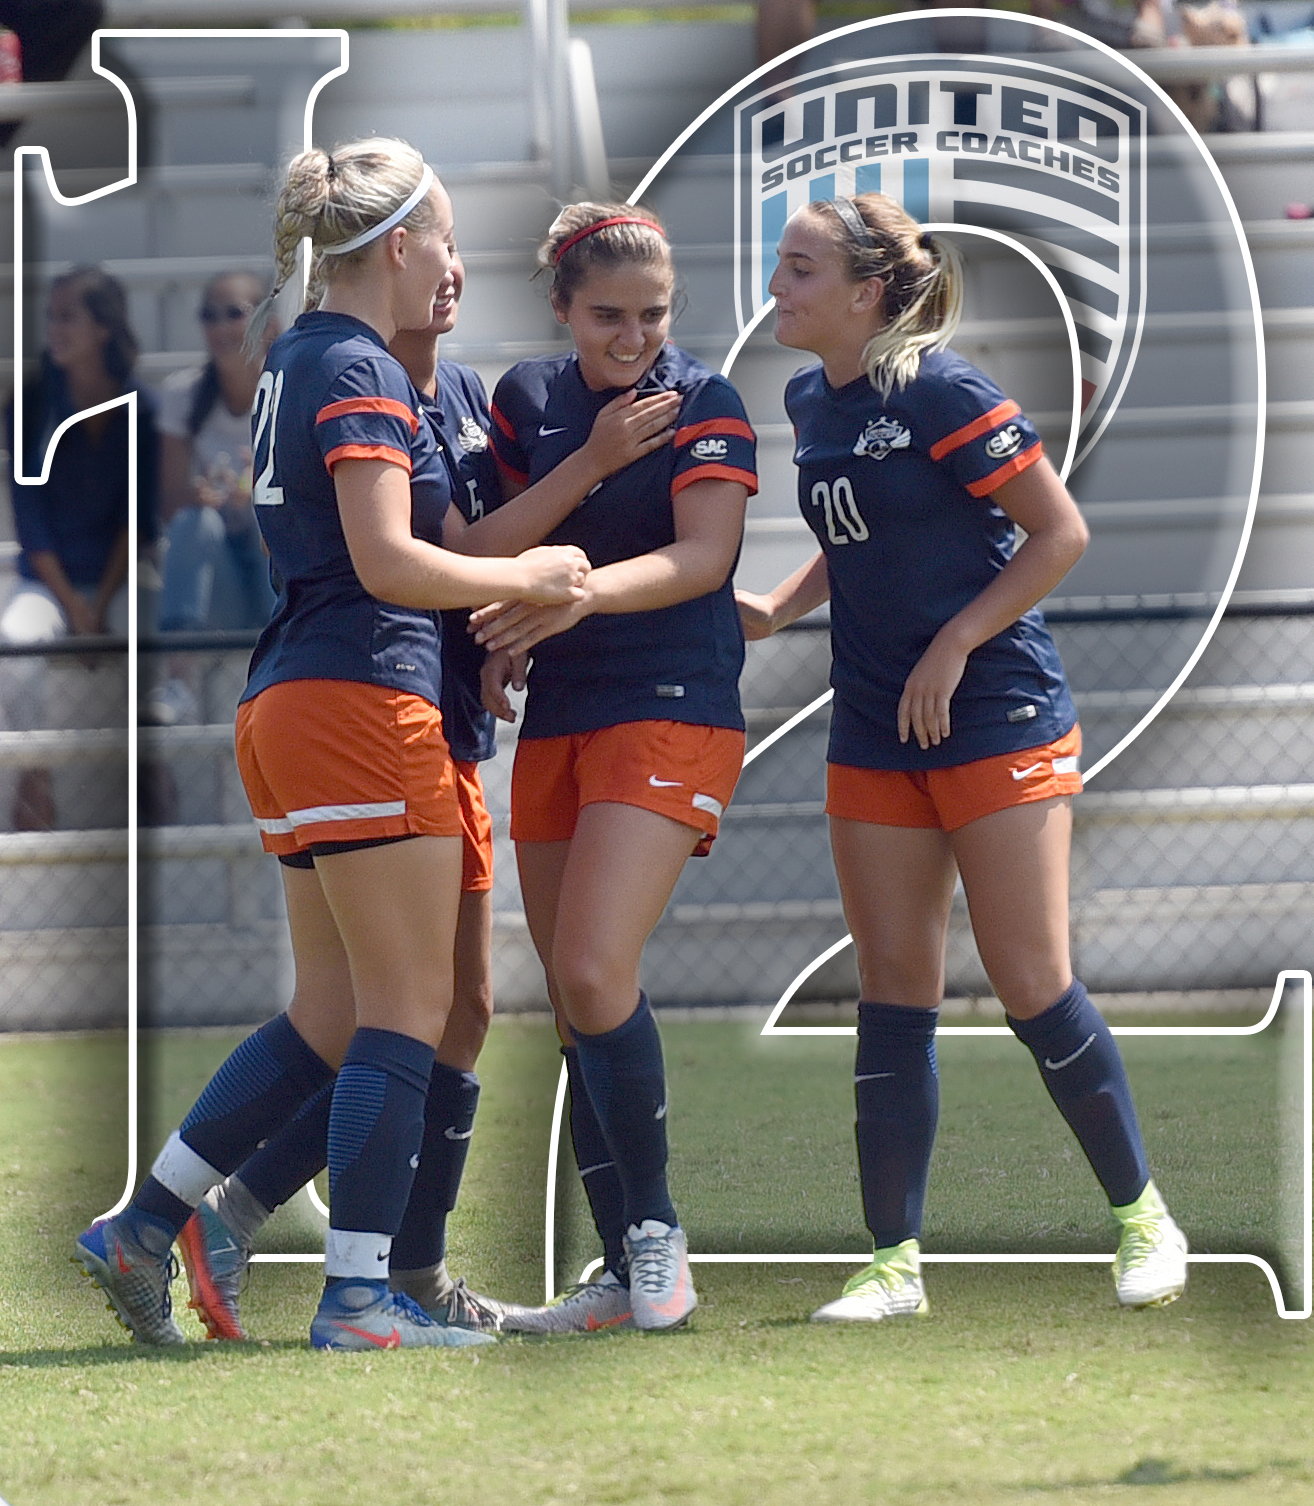 Eagles move up to No. 12 in United Soccer Coaches' poll